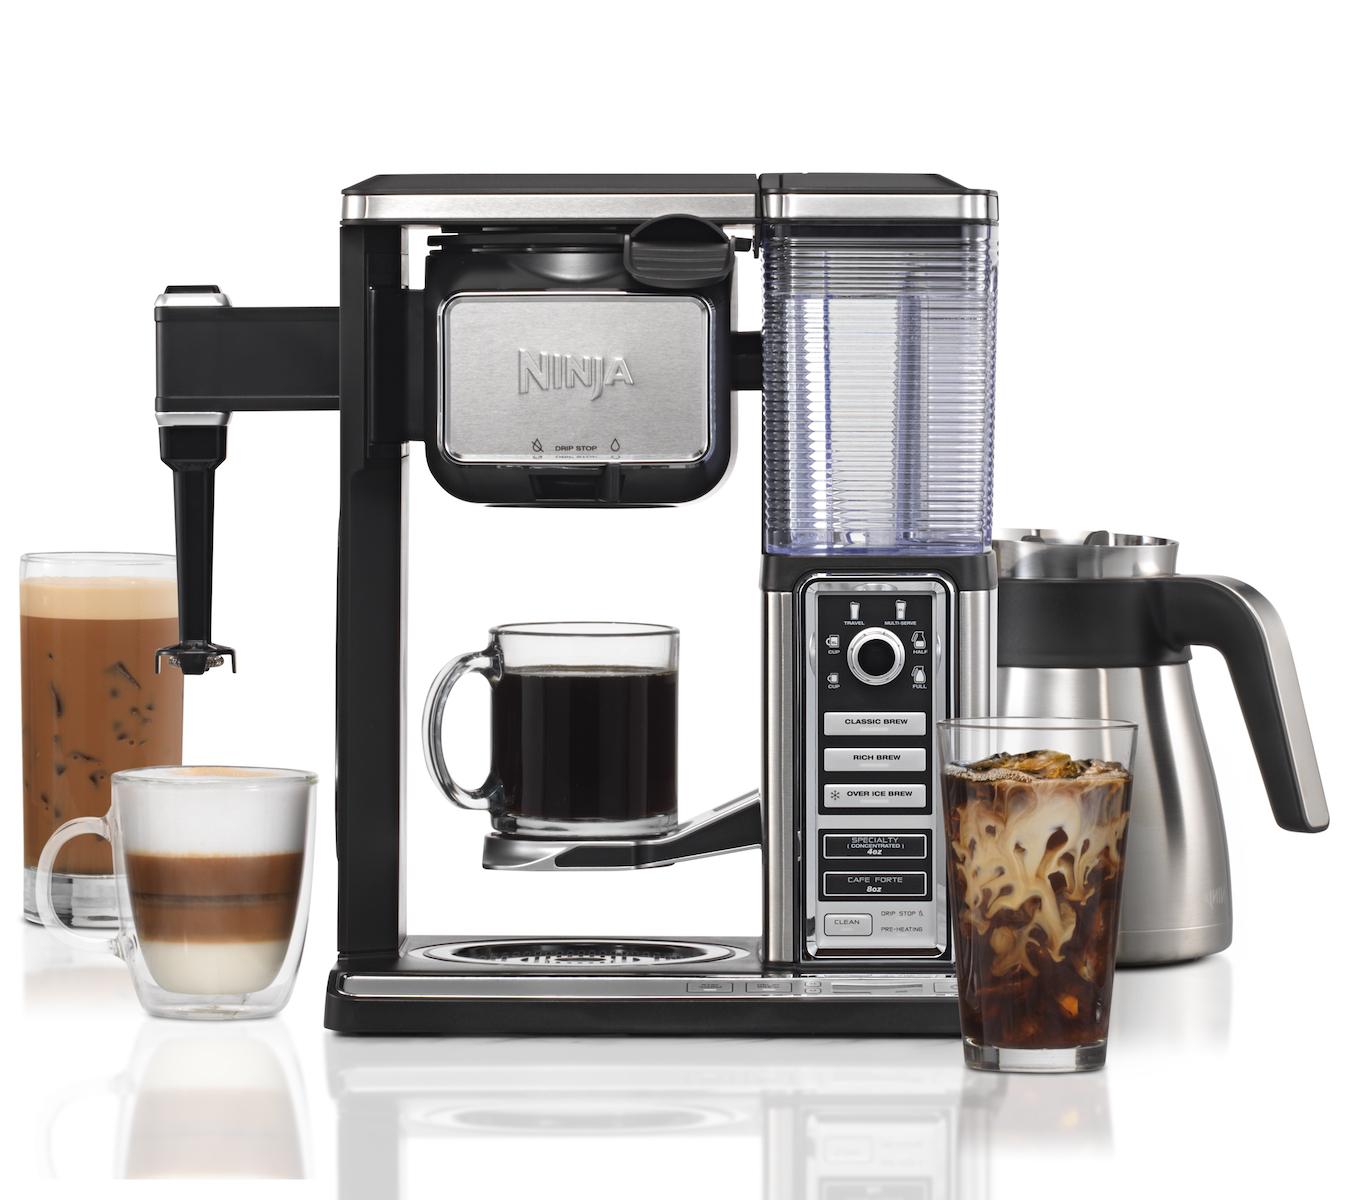 Ninja CF097 Coffee Bar Auto-iQ Programmable Coffee Maker with 6 Brew Sizes, 5 Brew Options, Milk Frother, Removable Water Reservoir, Stainless Carafe (Renewed)